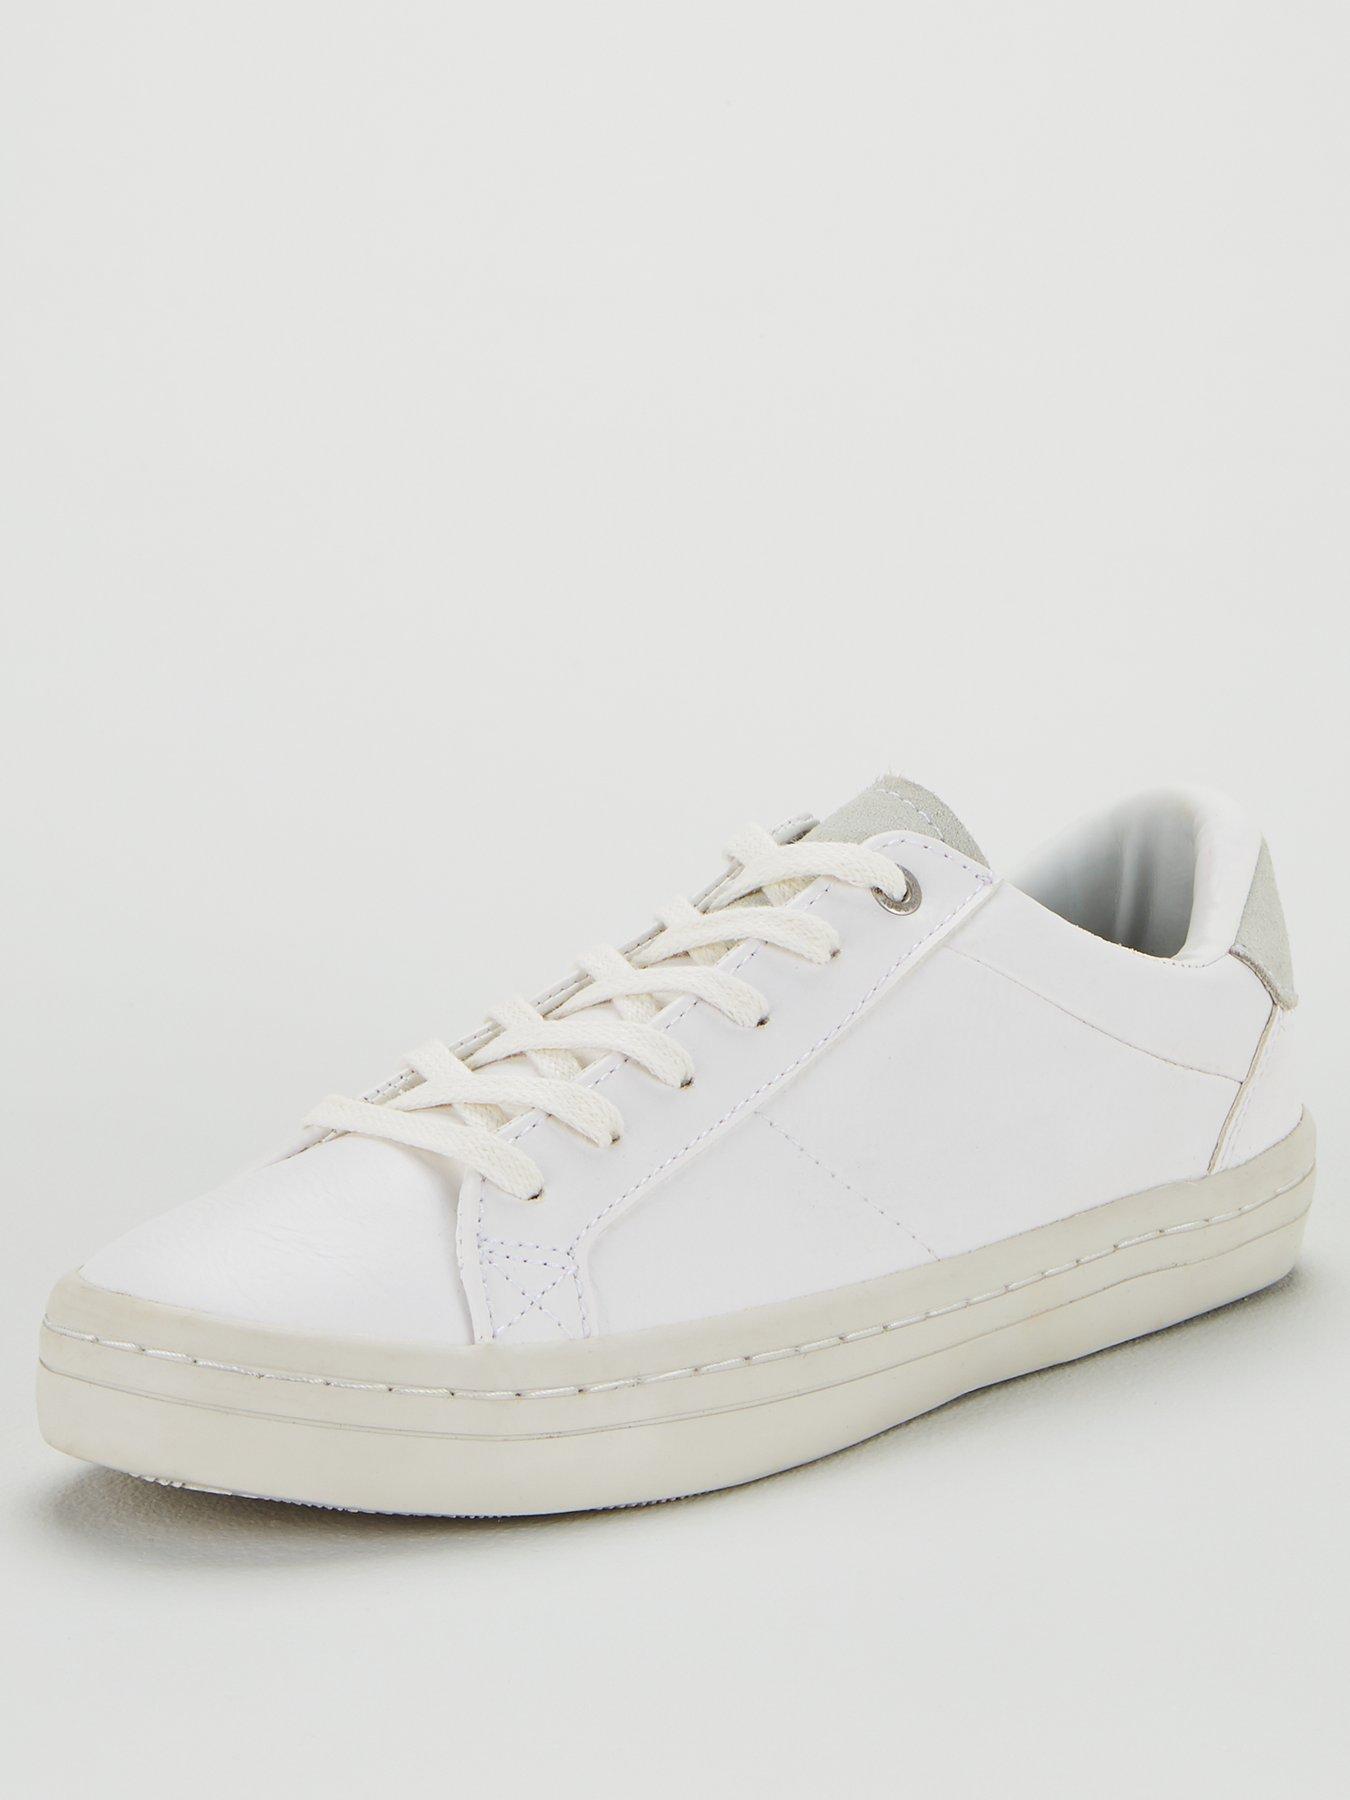 ladies women white trainers touch fastening low profile injected sole sizes 3-8